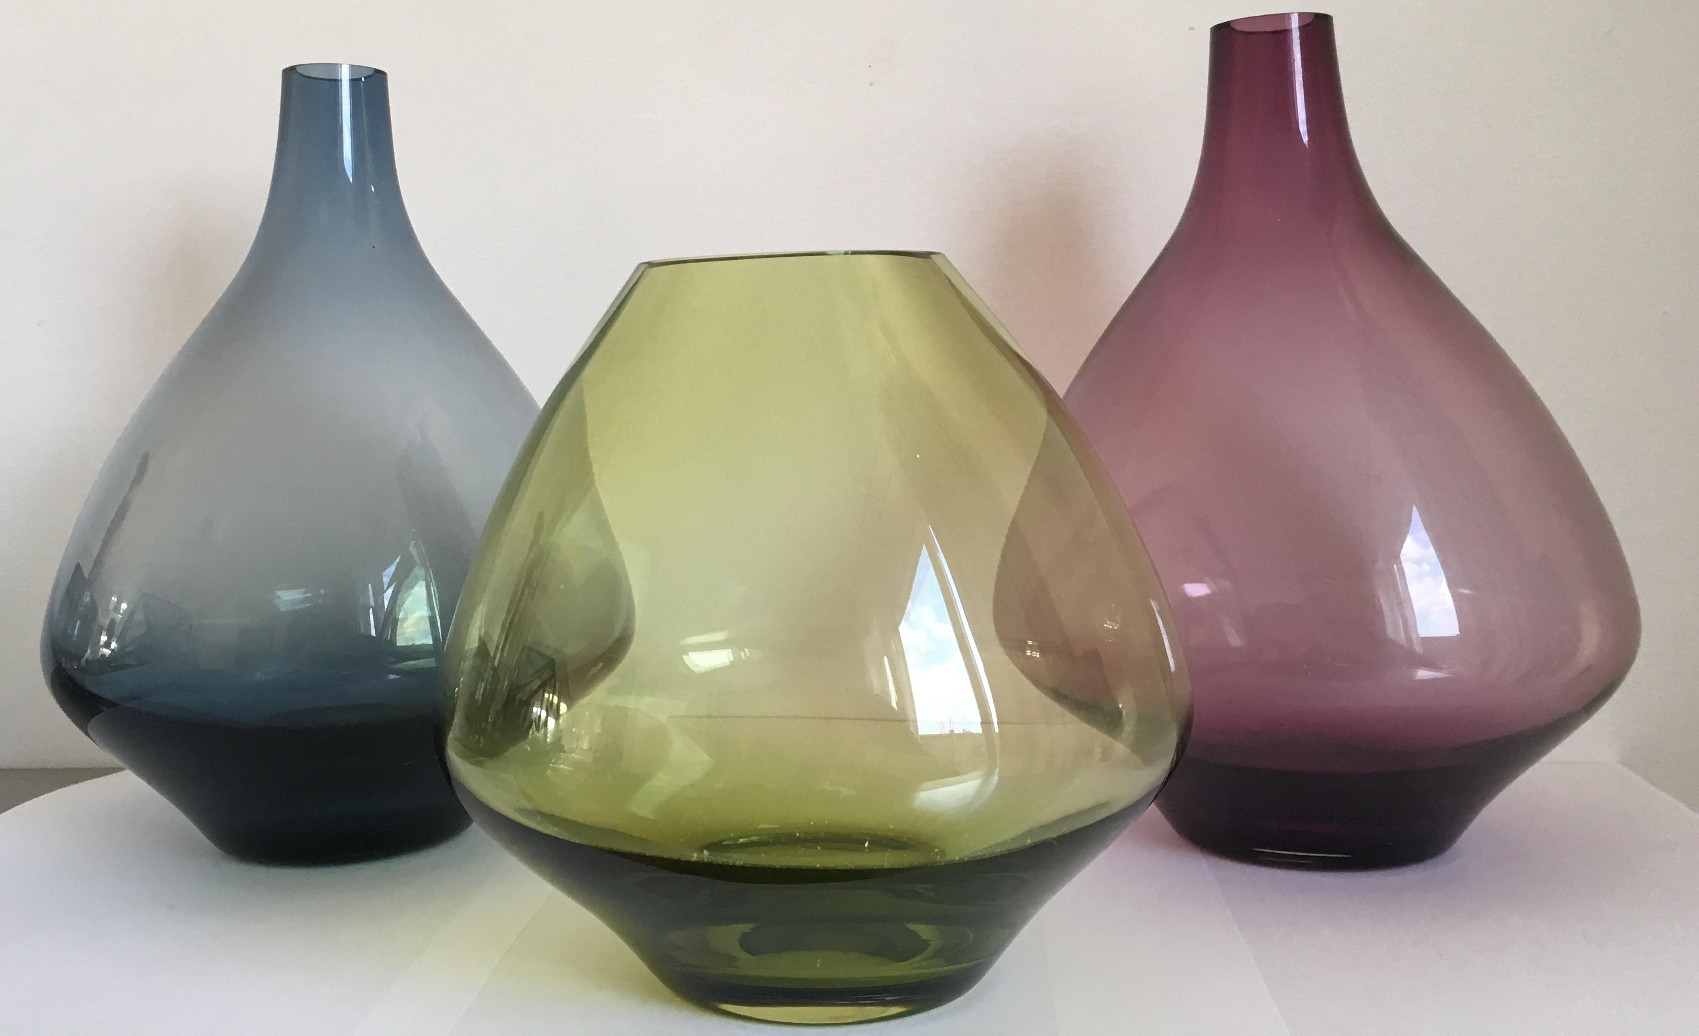 12 Wonderful Caithness Glass Vase 2024 free download caithness glass vase of different heights of 4019 barrel vases caithness glass domhnall within different heights of 4019 barrel vases caithness glass domhnall obroin pinterest caithness glas